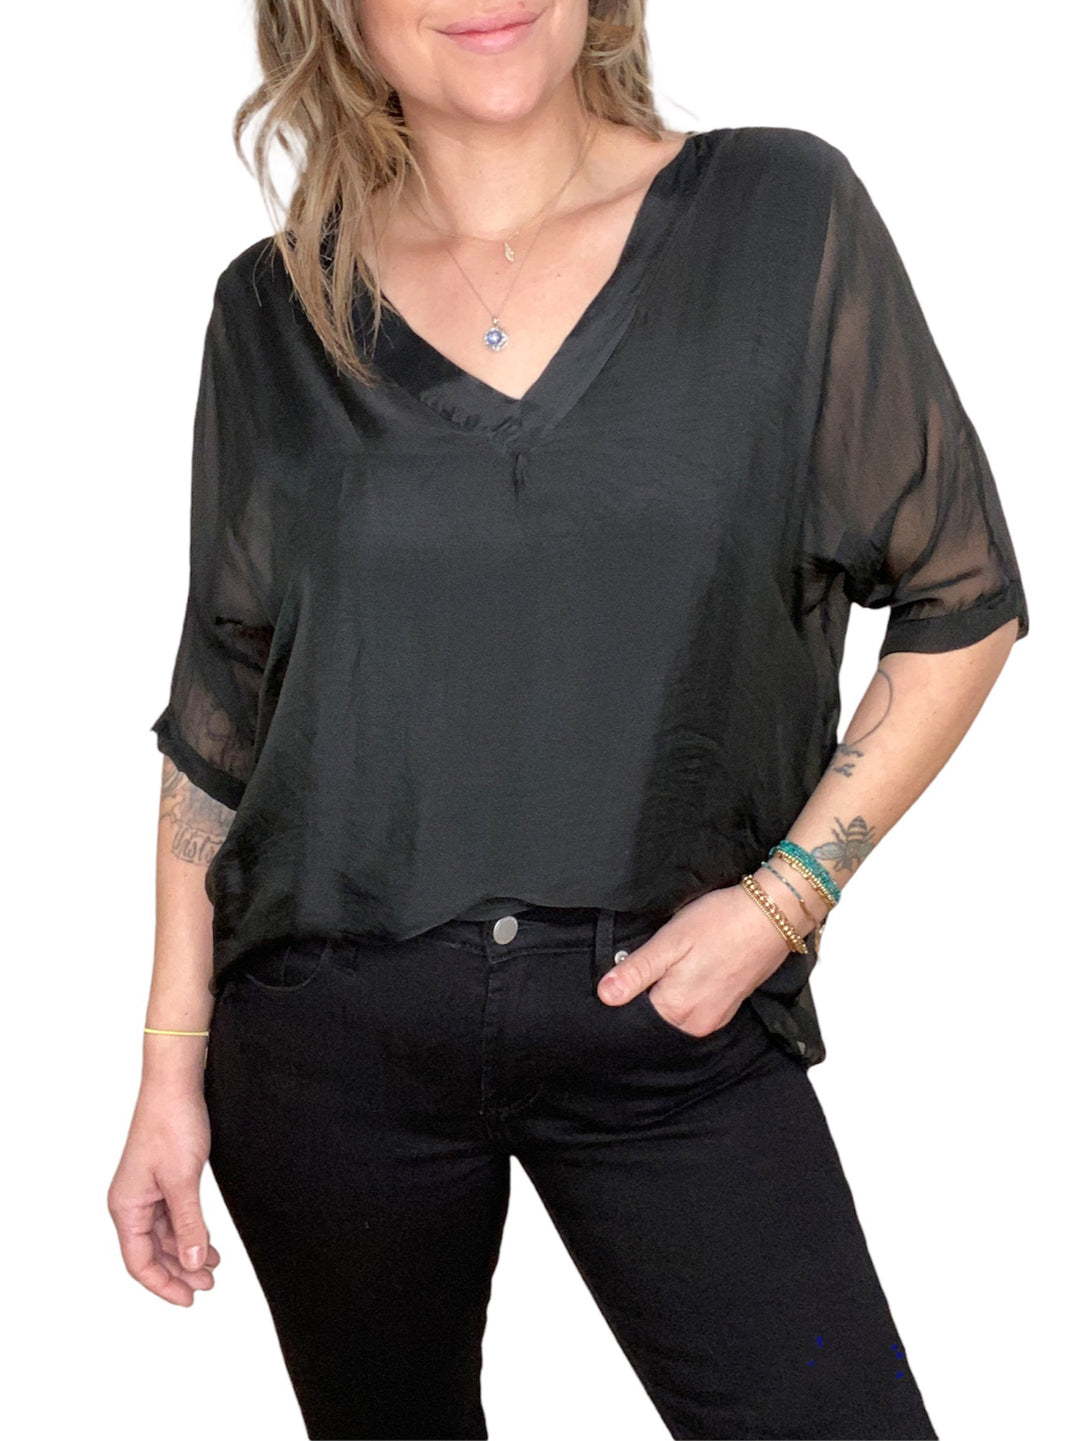 SILK V-NECK RUFFLE TOP - Kingfisher Road - Online Boutique